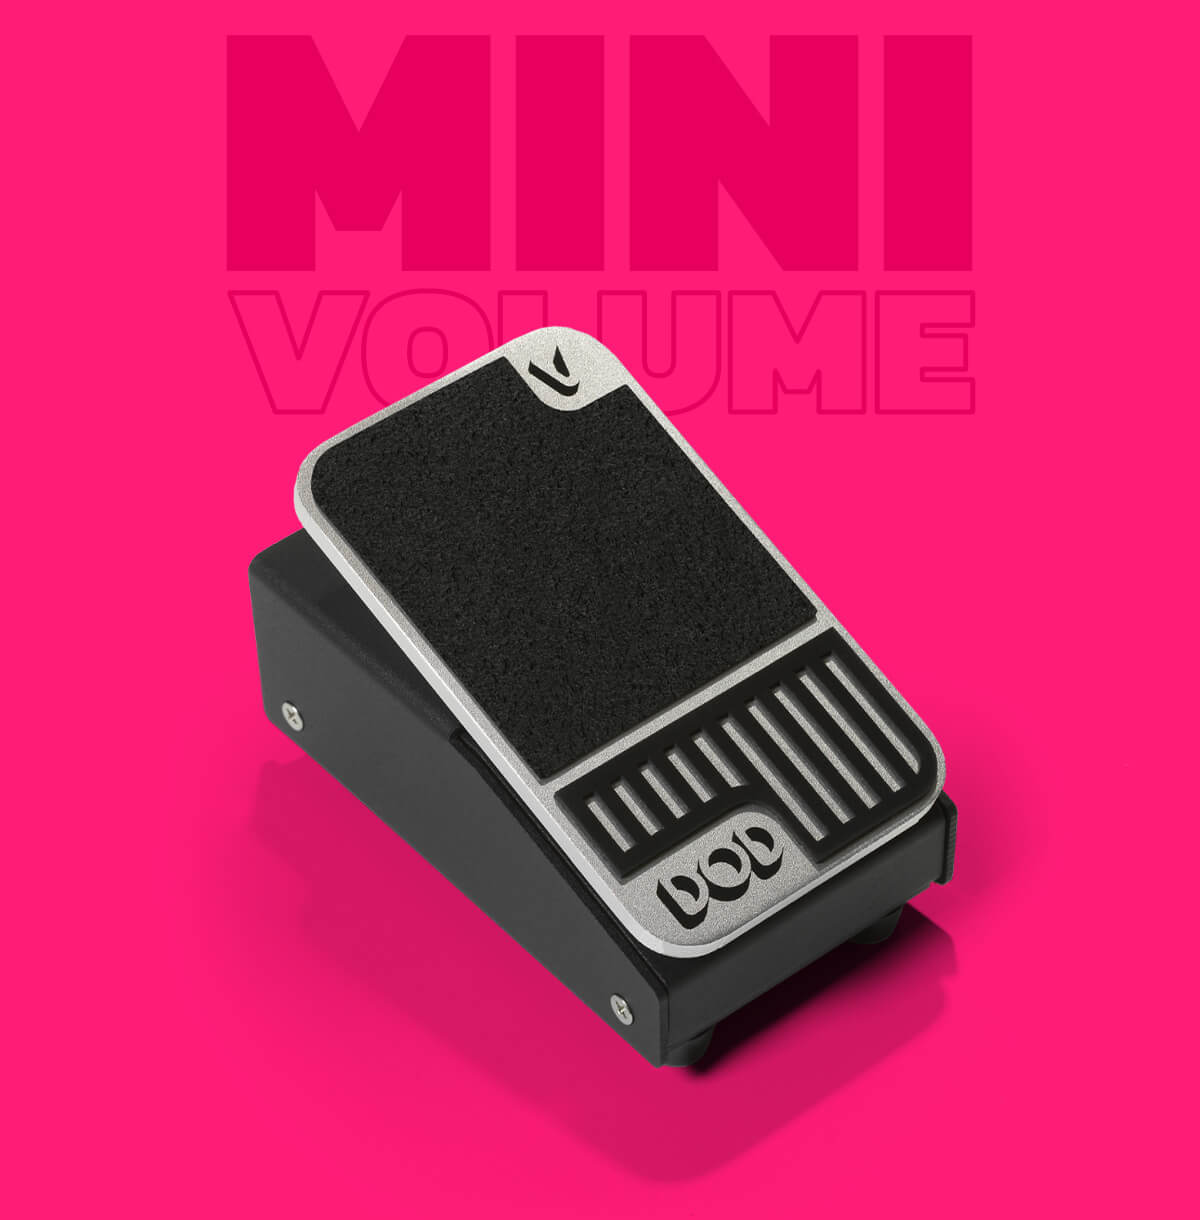 DOD Mini Volume ultra compact volume guitar pedal in black and silver with pink background that says 